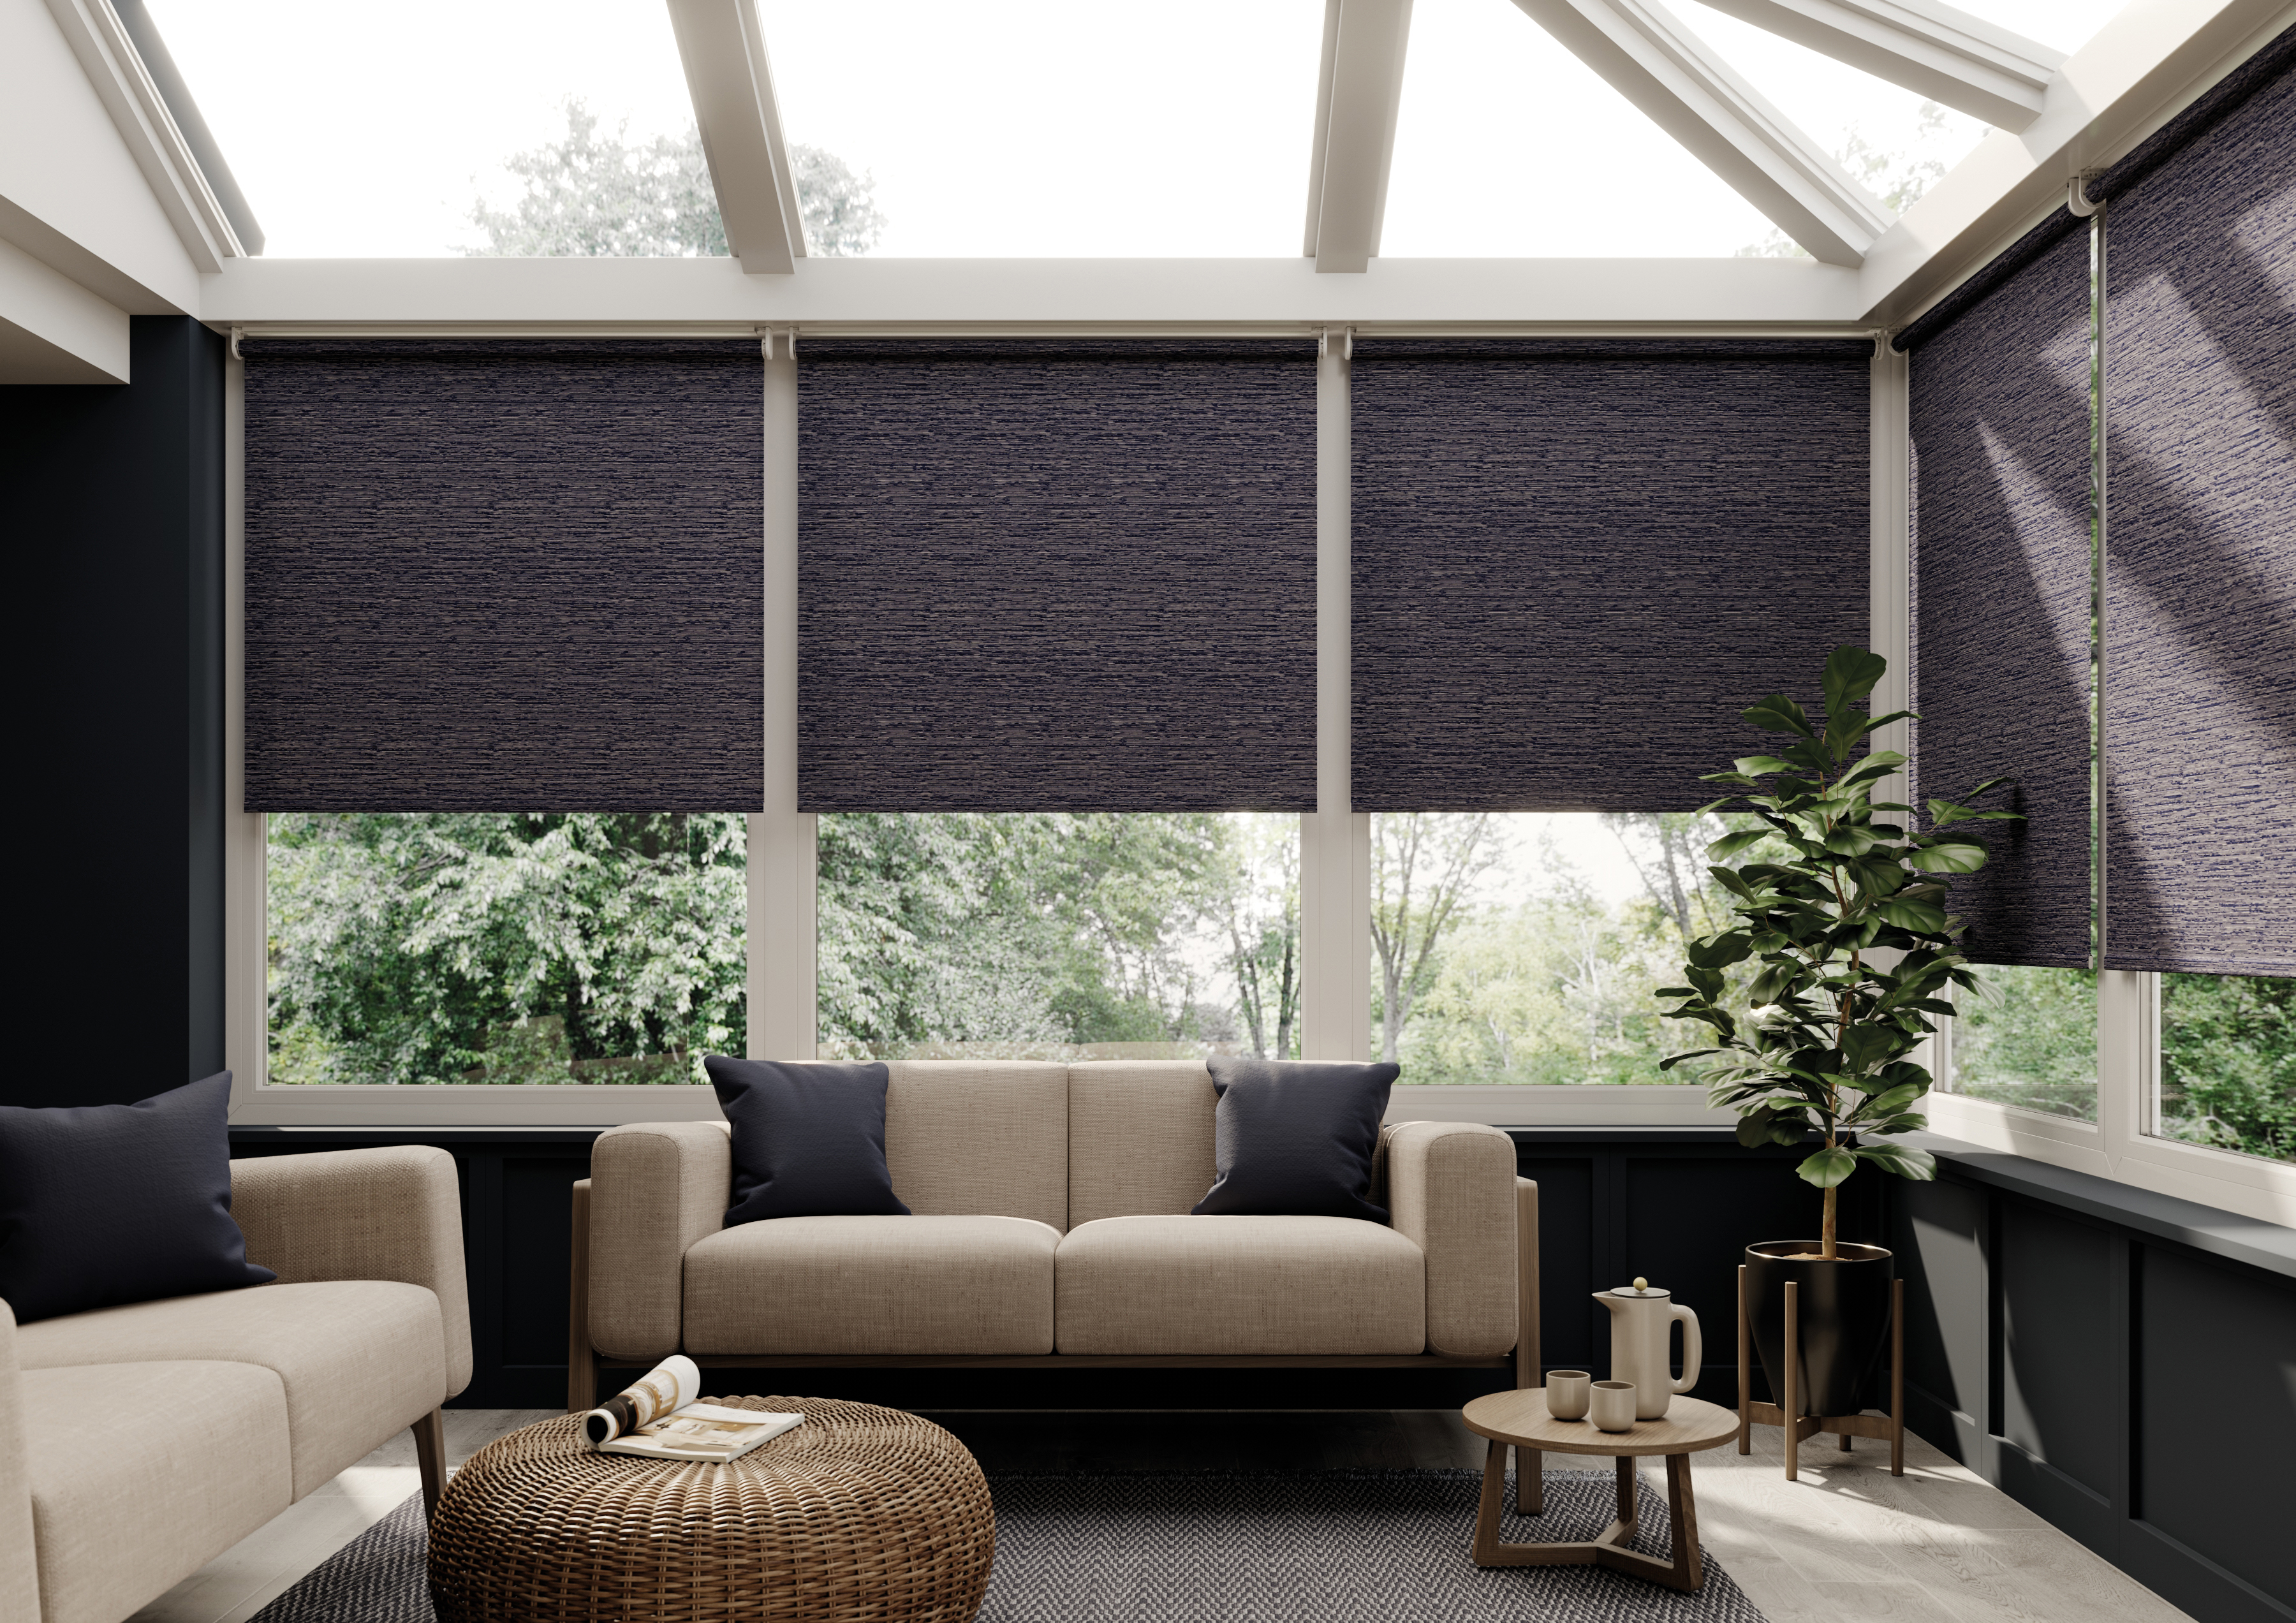 What are the advantages of roller blinds?